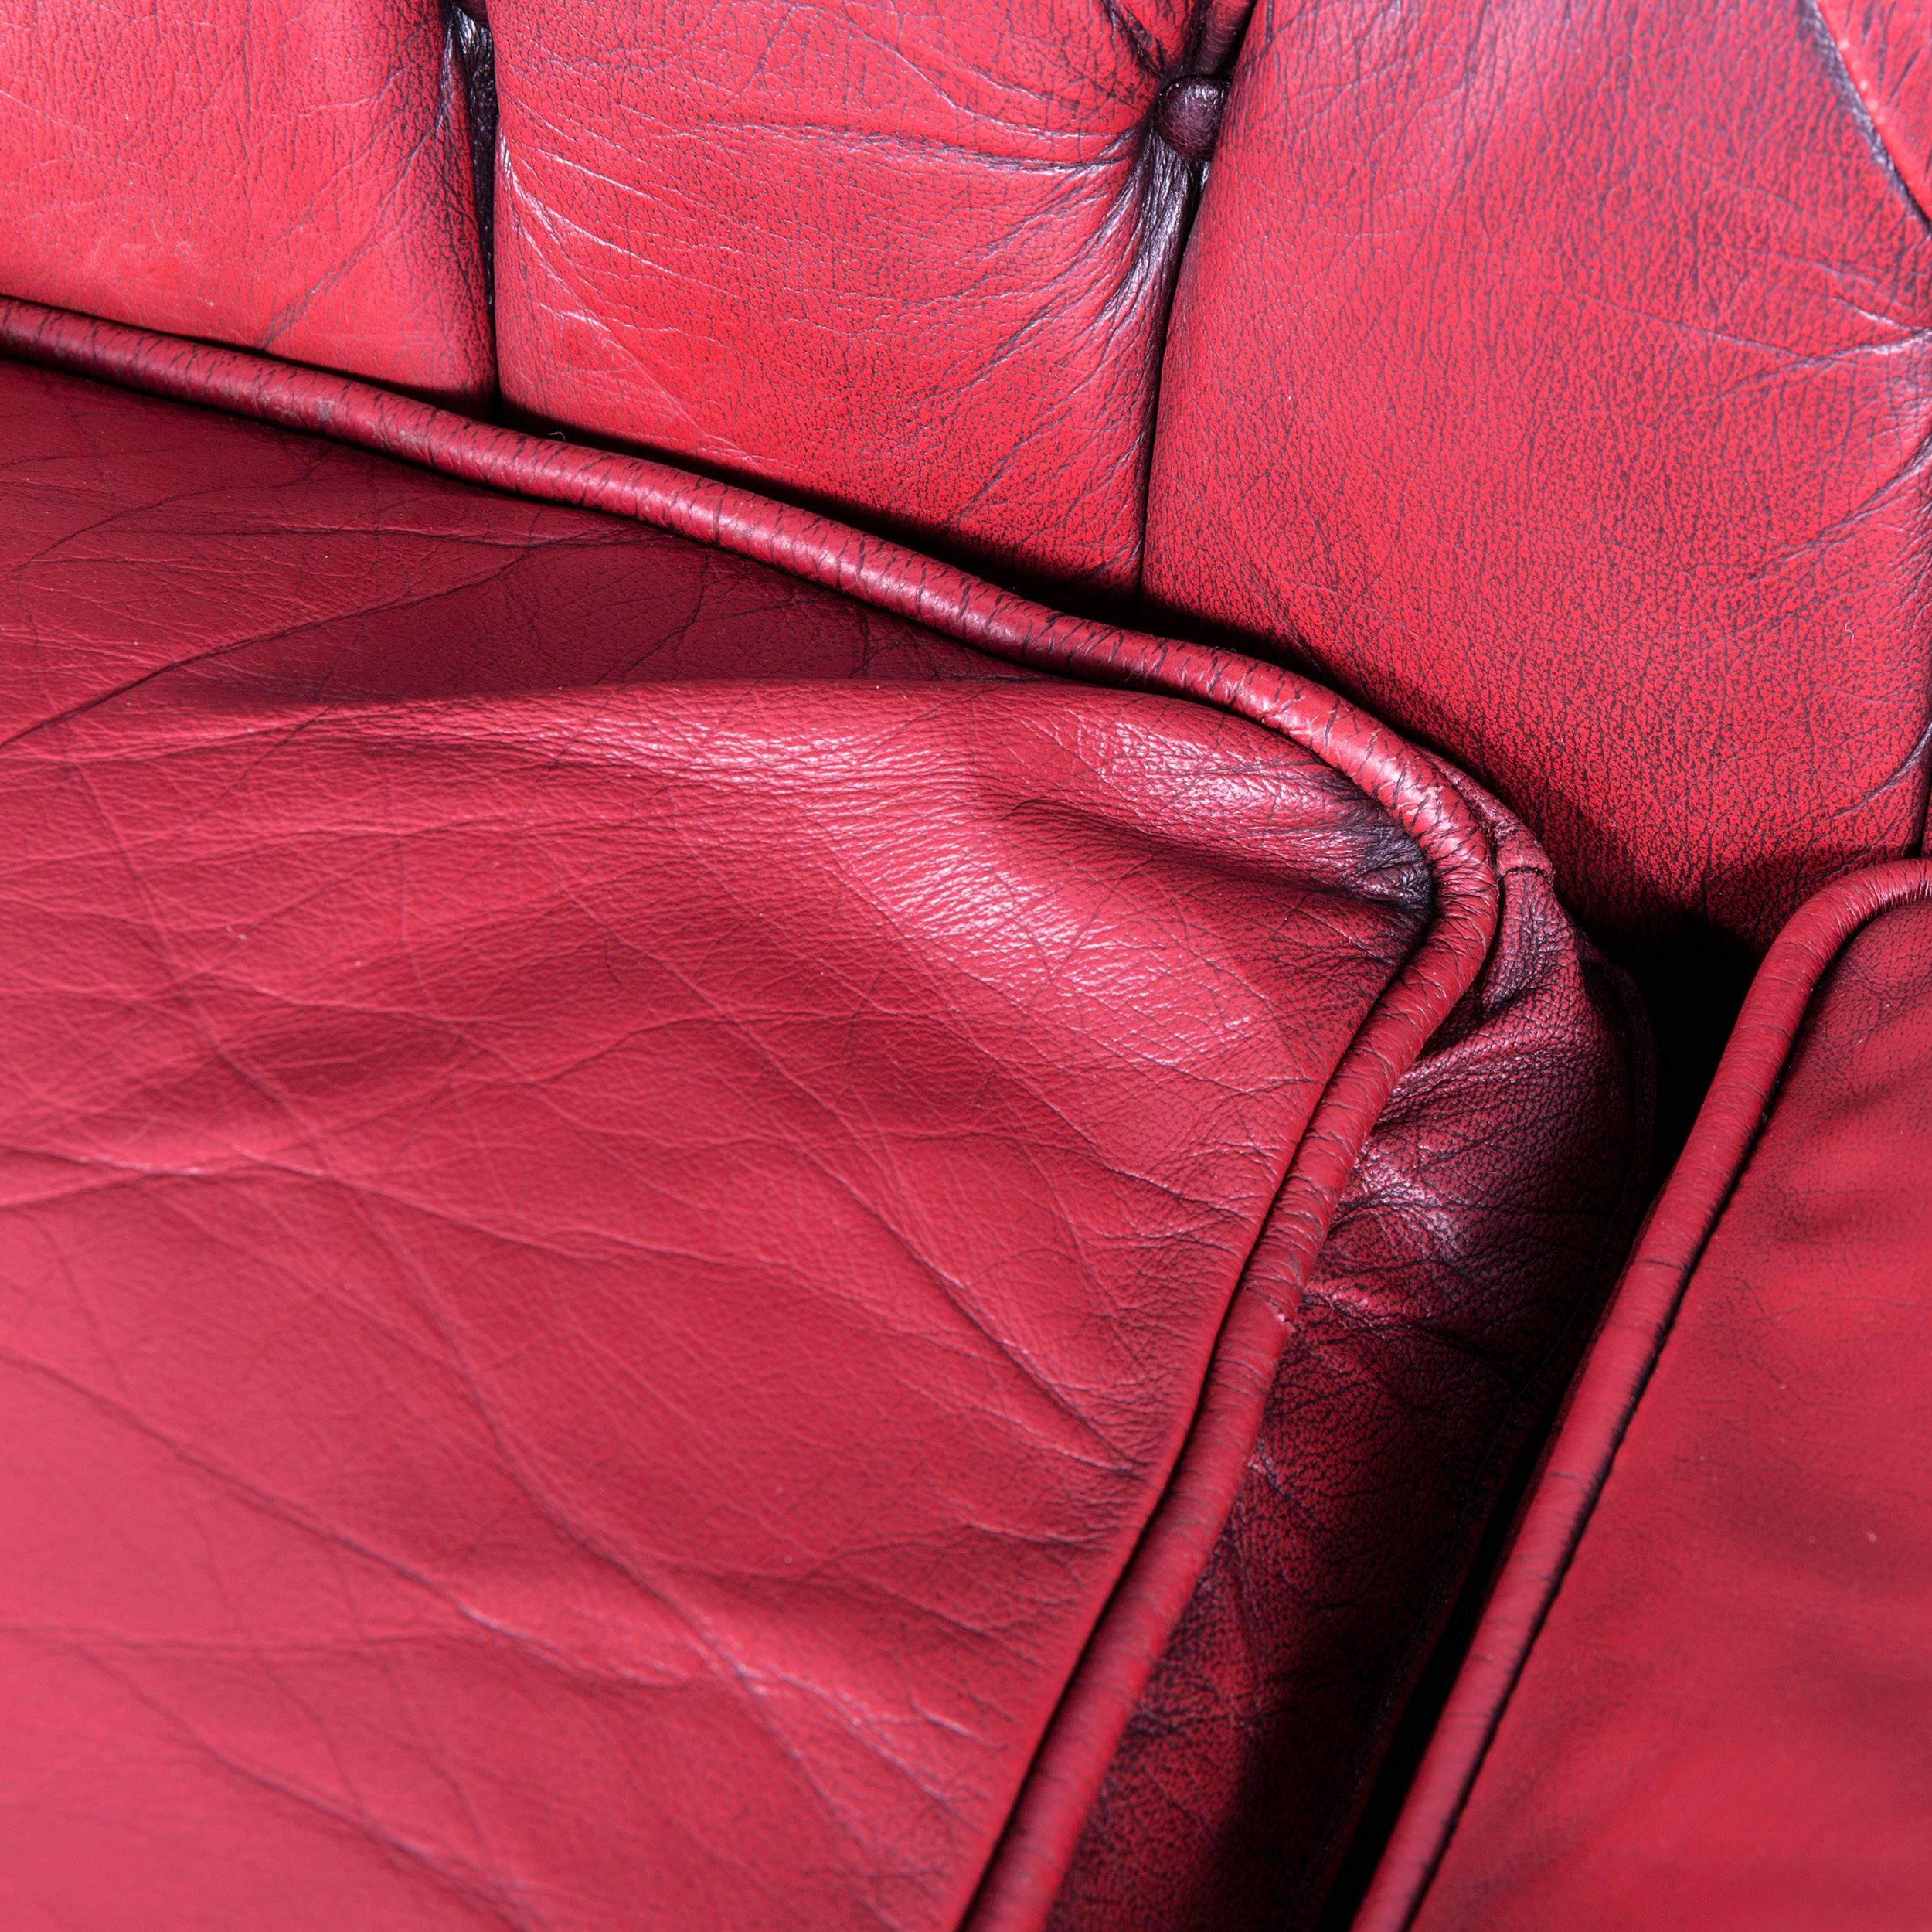 20th Century Chesterfield Sofa Set Red Leather Couch Vintage Retro Rivets For Sale